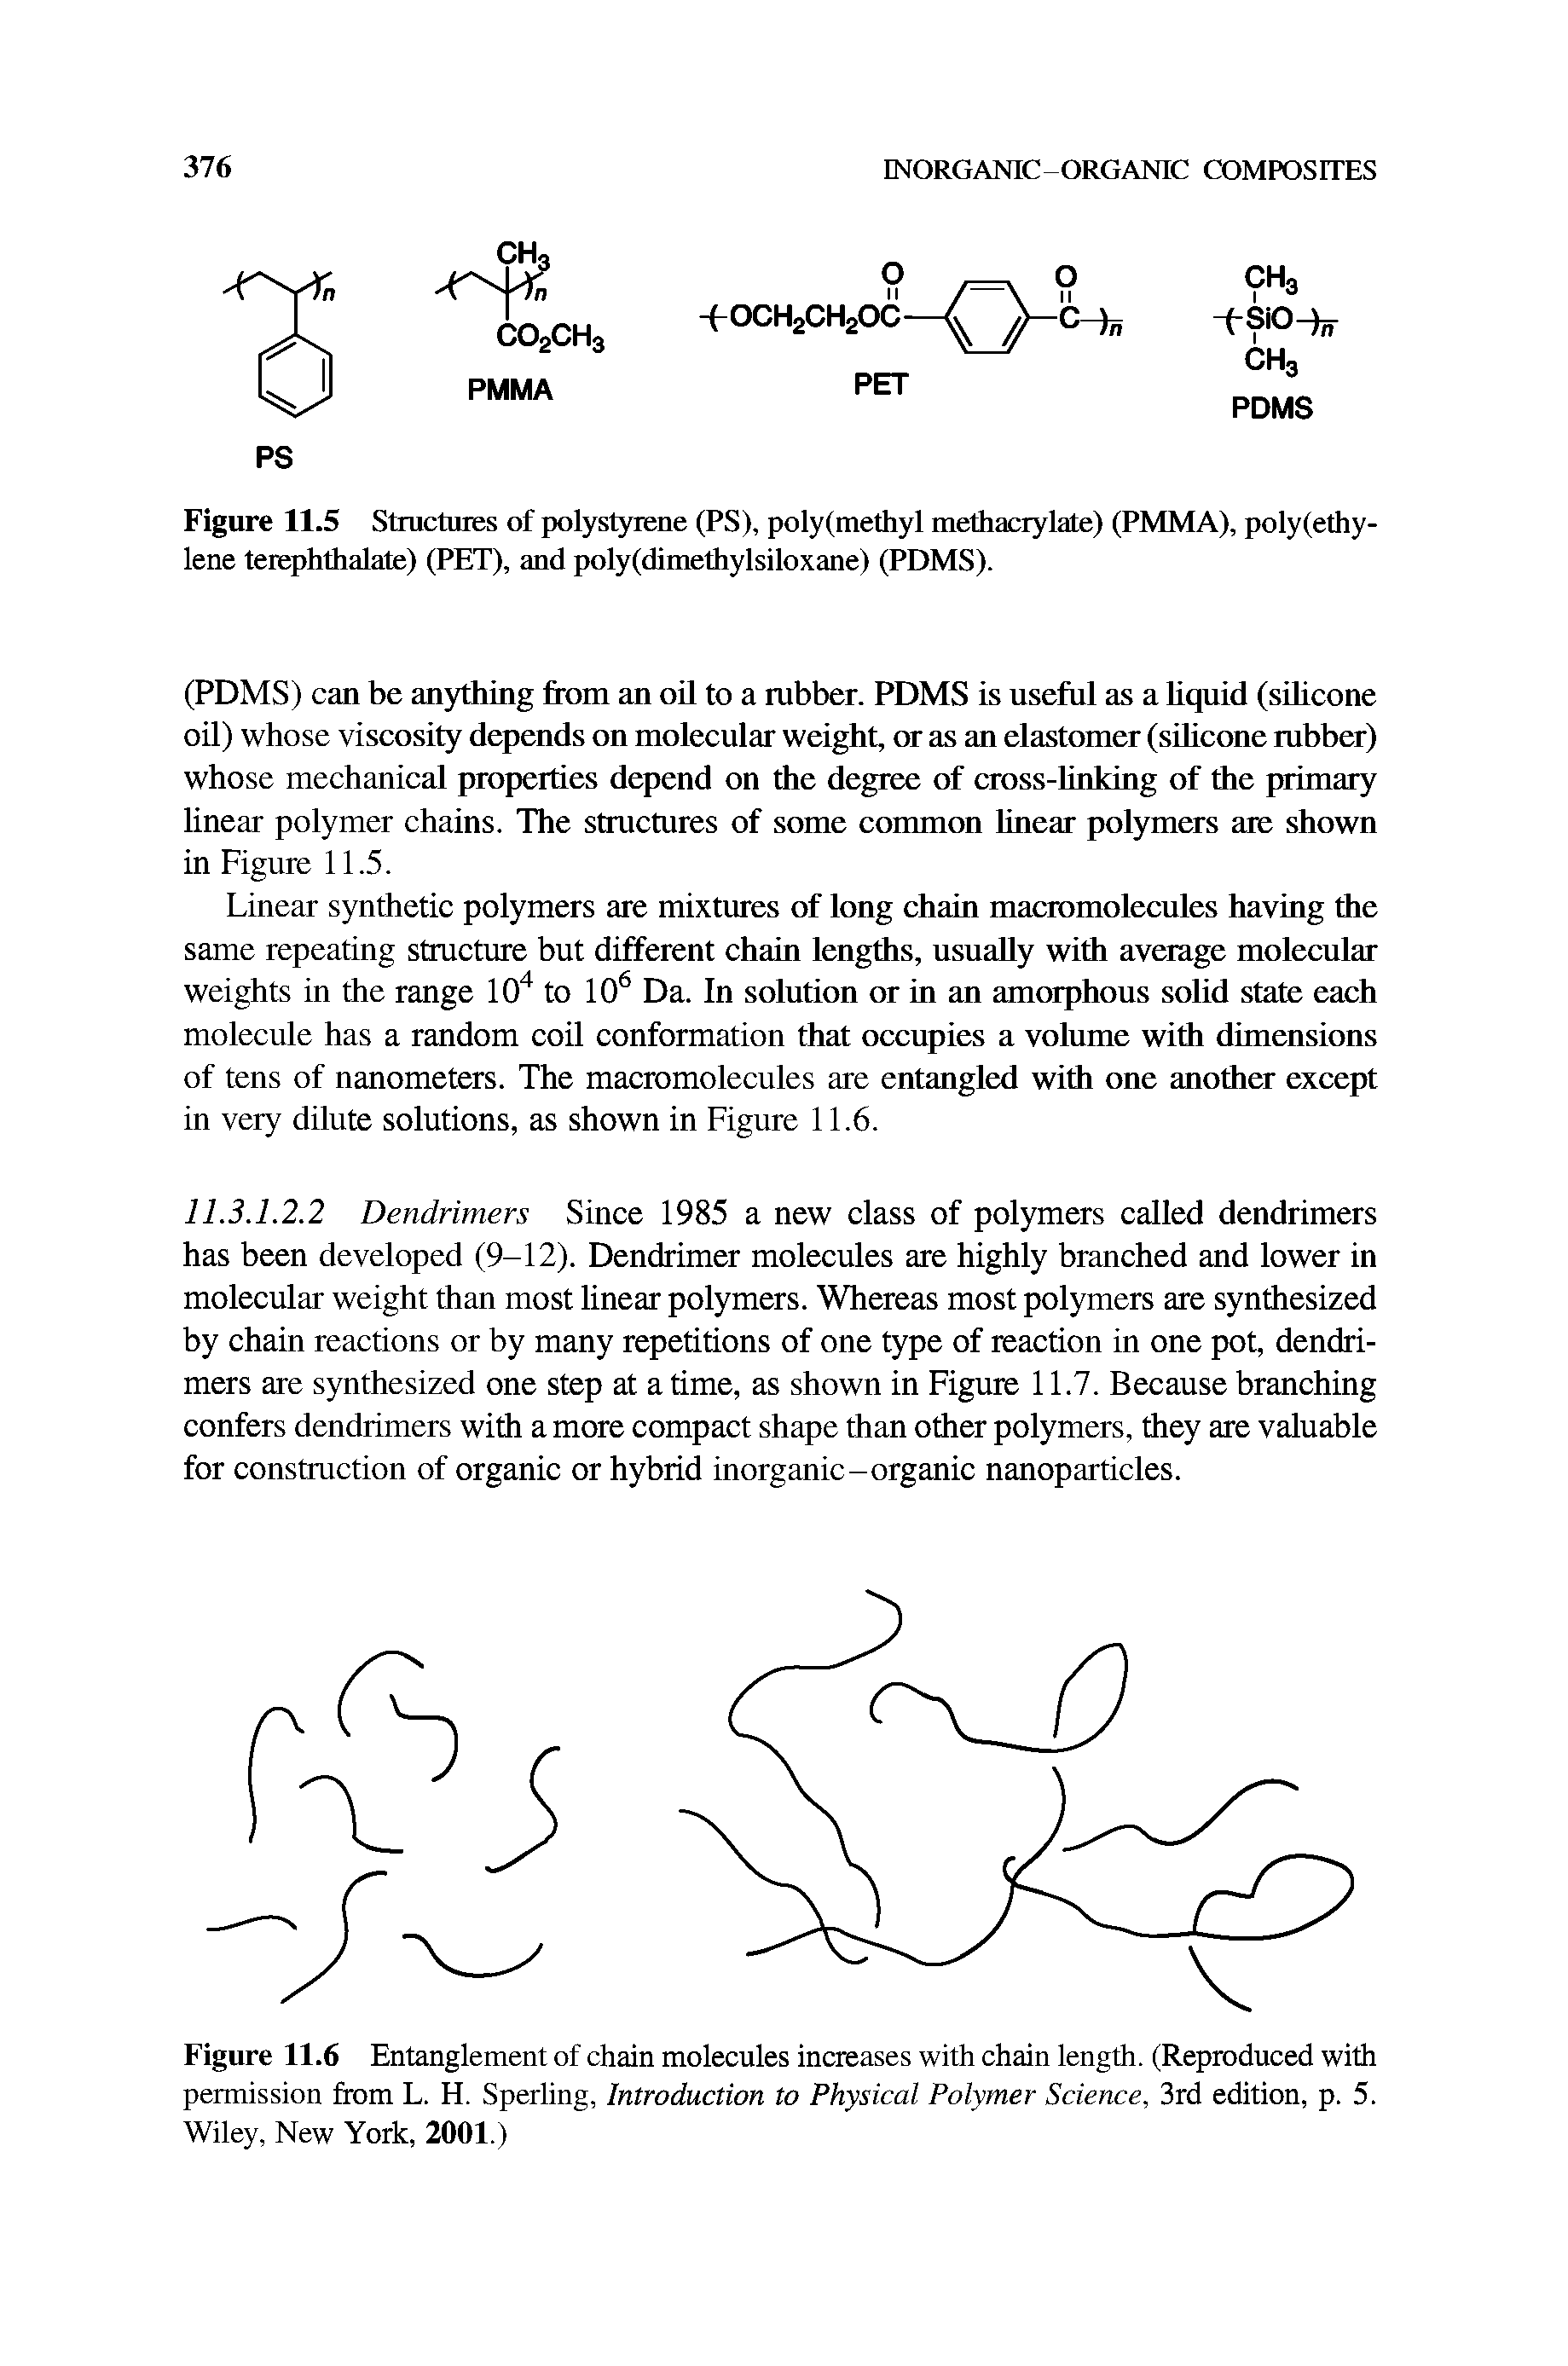 Figure 11.6 Entanglement of chain molecules increases with chain length. (Reproduced with permission from L. H. Sperling, Introduction to Physical Polymer Science, 3rd edition, p. 5. Wiley, New York, 2001.)...